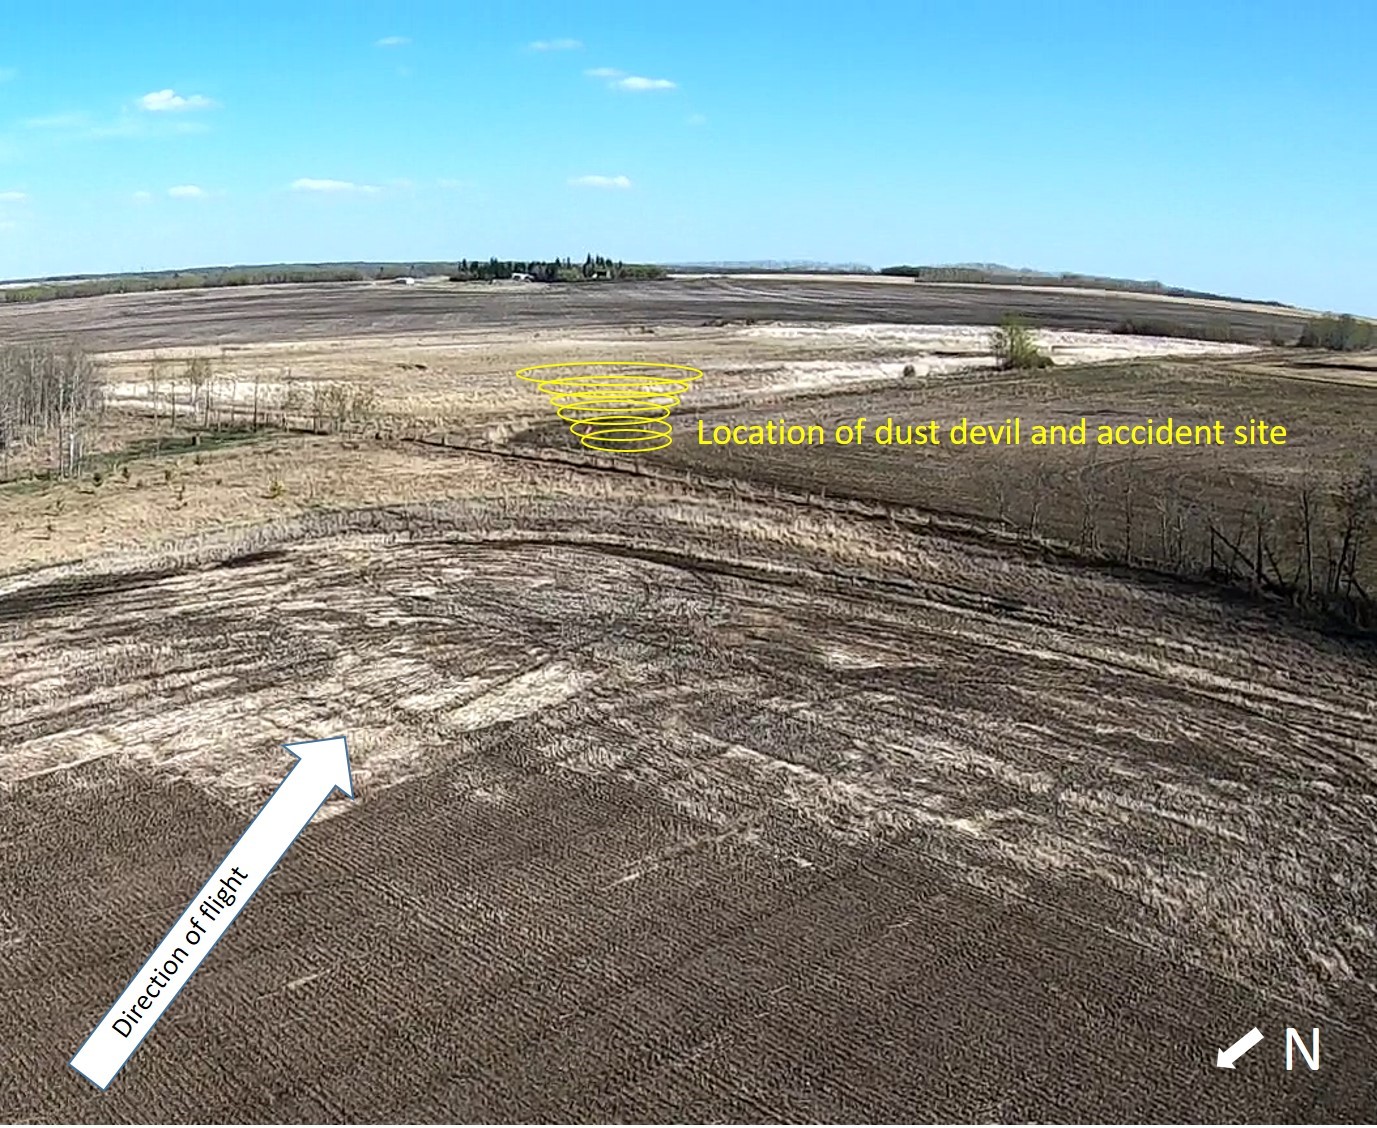 Still image from action video recorded on 13 May 2020, approximately 3 minutes before the accident, showing the location of the dust devil and the accident site, looking southeast (Source: Pilot’s action video camera, with TSB annotations)